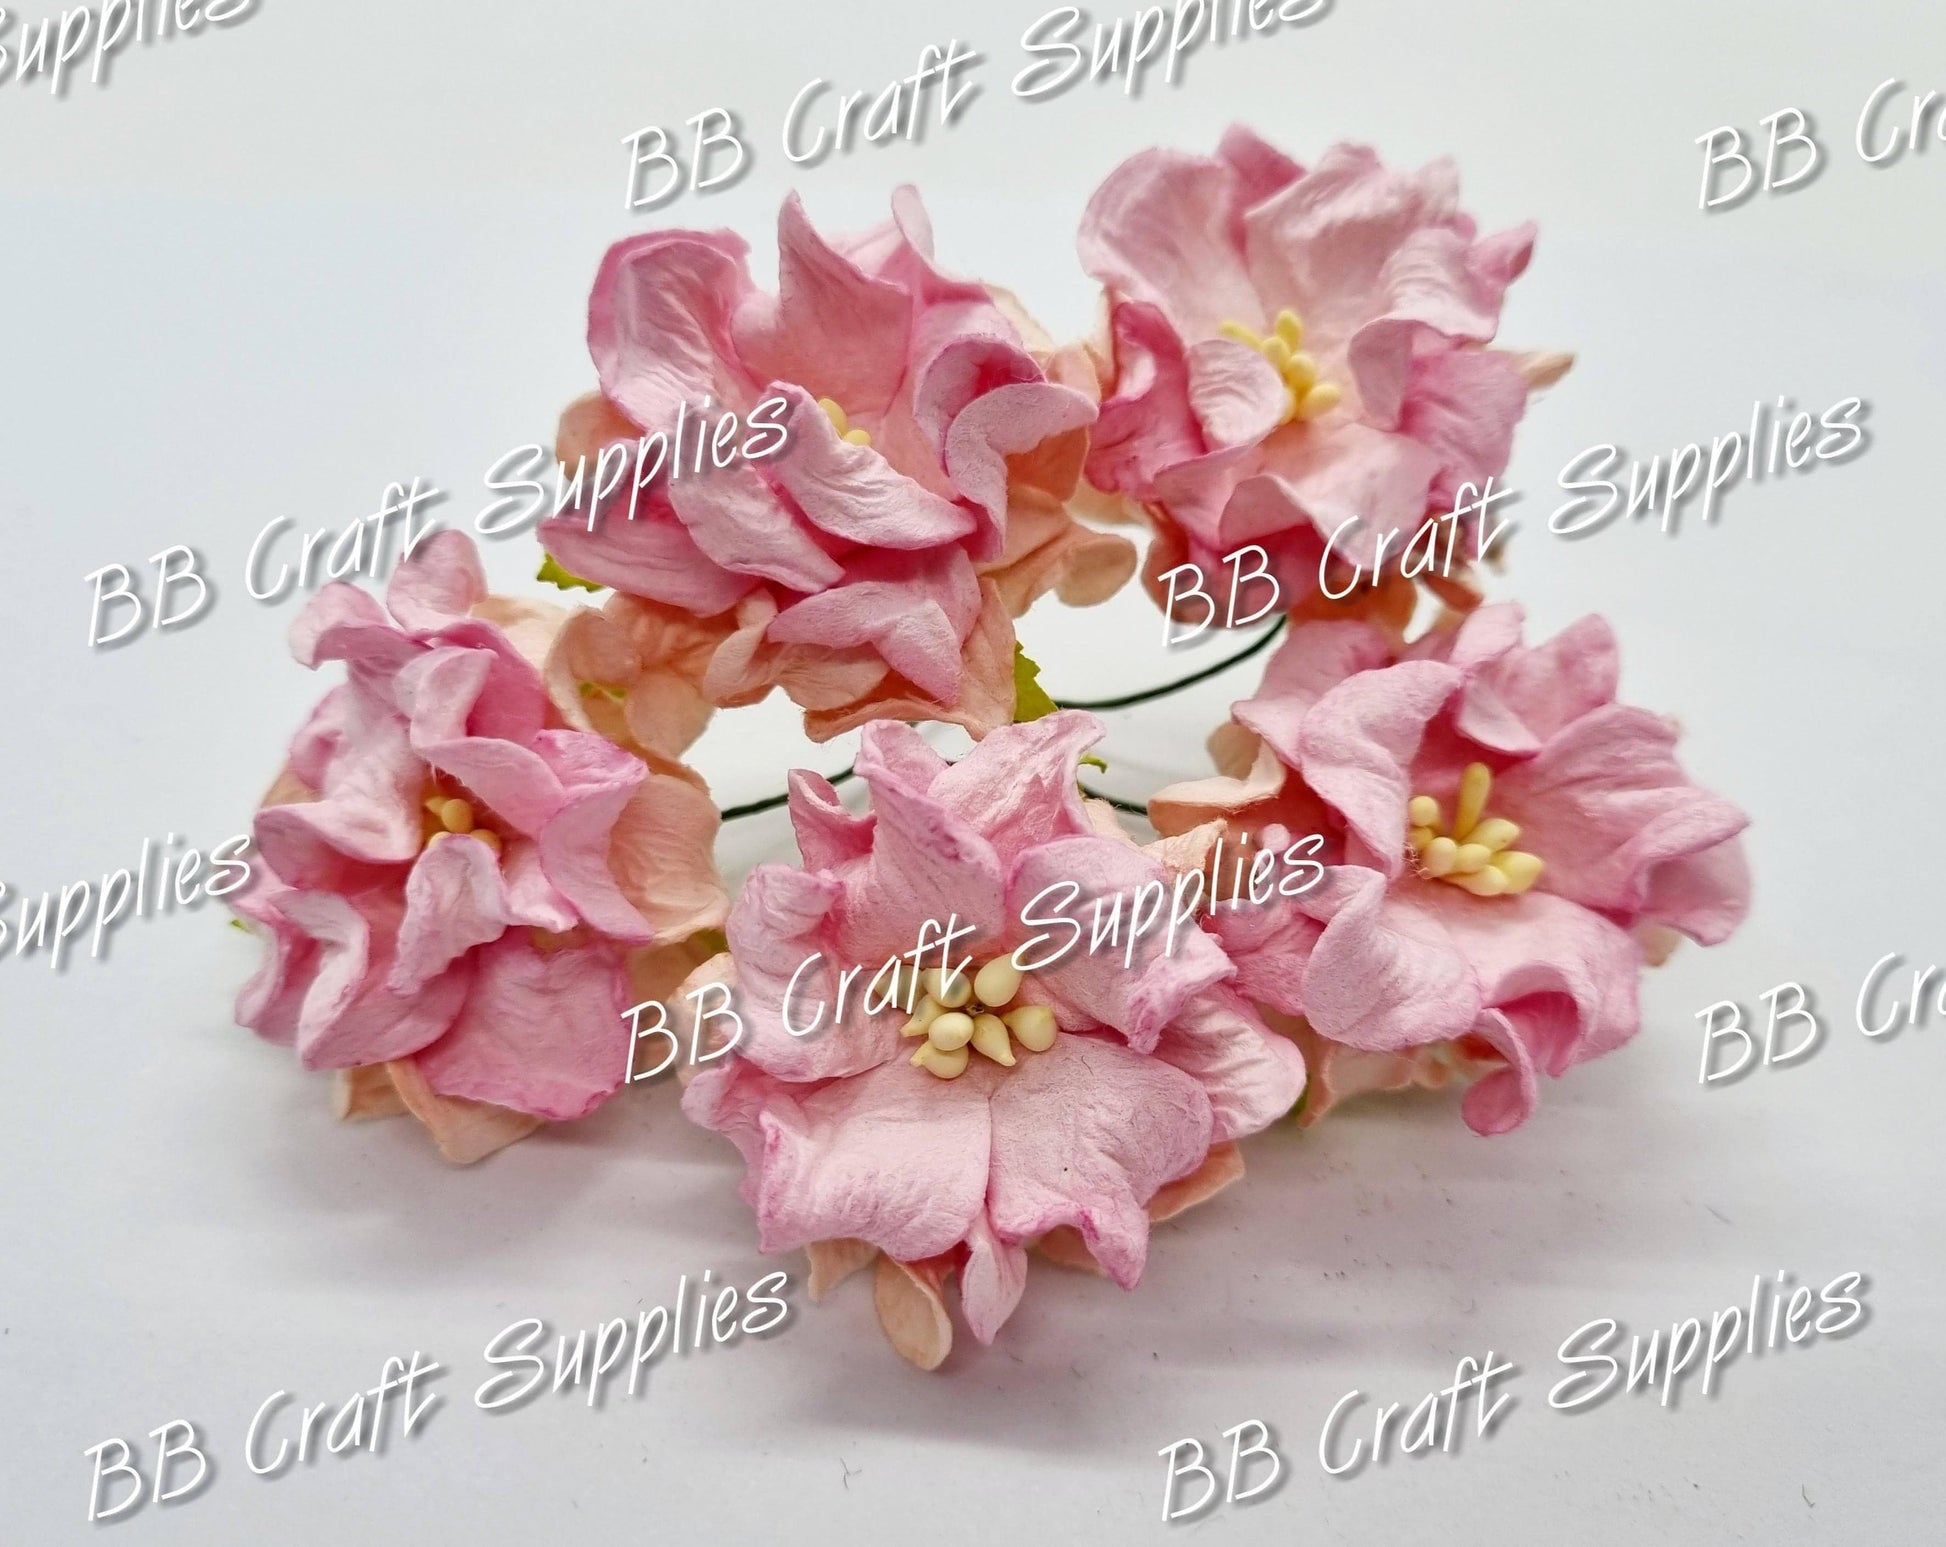 Gardenia Flowers Pink 5 pack - Embelishment, Flower, Mini, Mulburry, mullberry, pink, rose - Bare Butler Faux Leather Supplies 